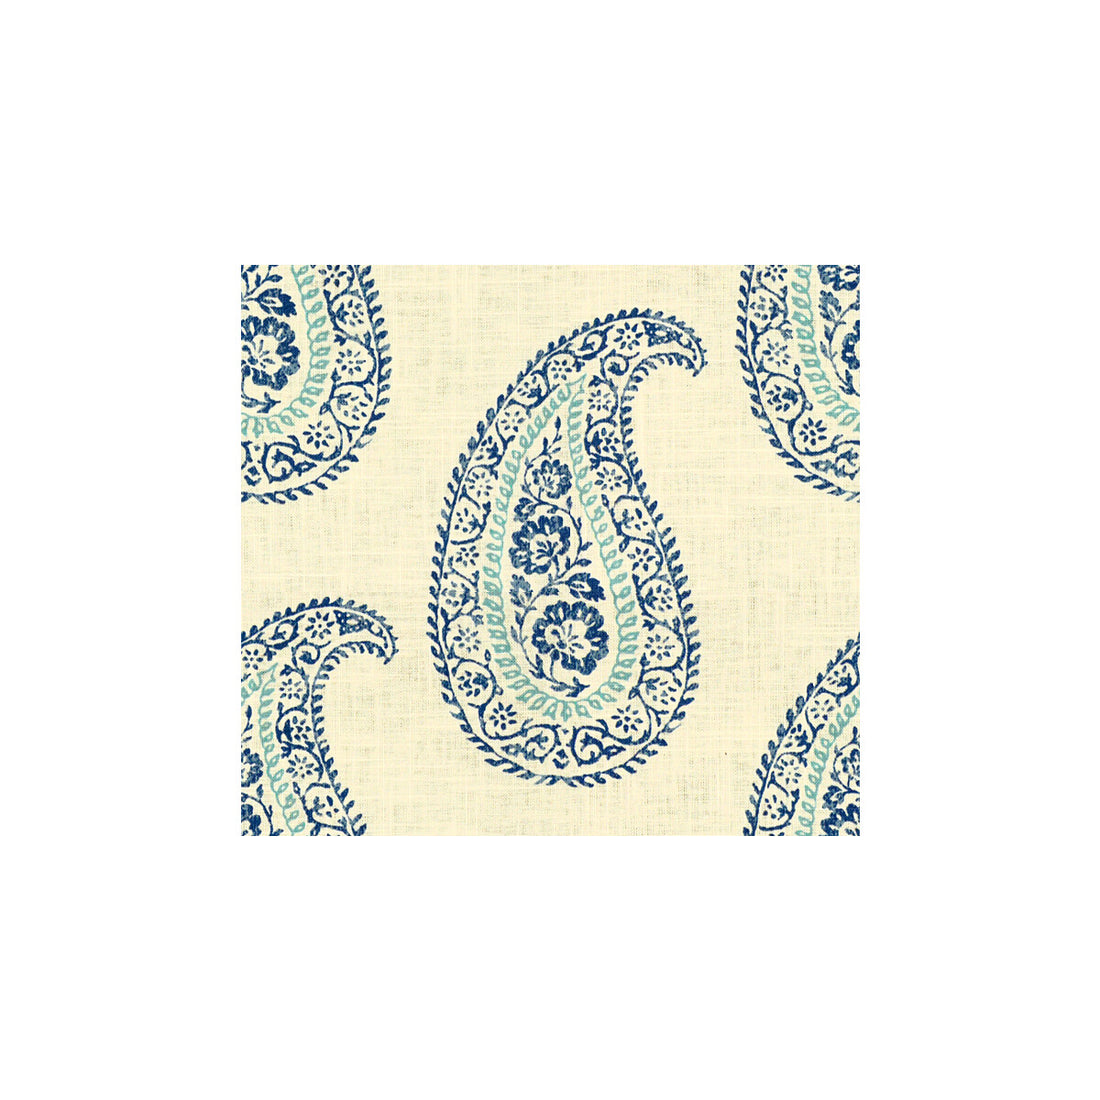 Madira fabric in sea color - pattern MADIRA.513.0 - by Kravet Design in the Echo Heirloom India collection